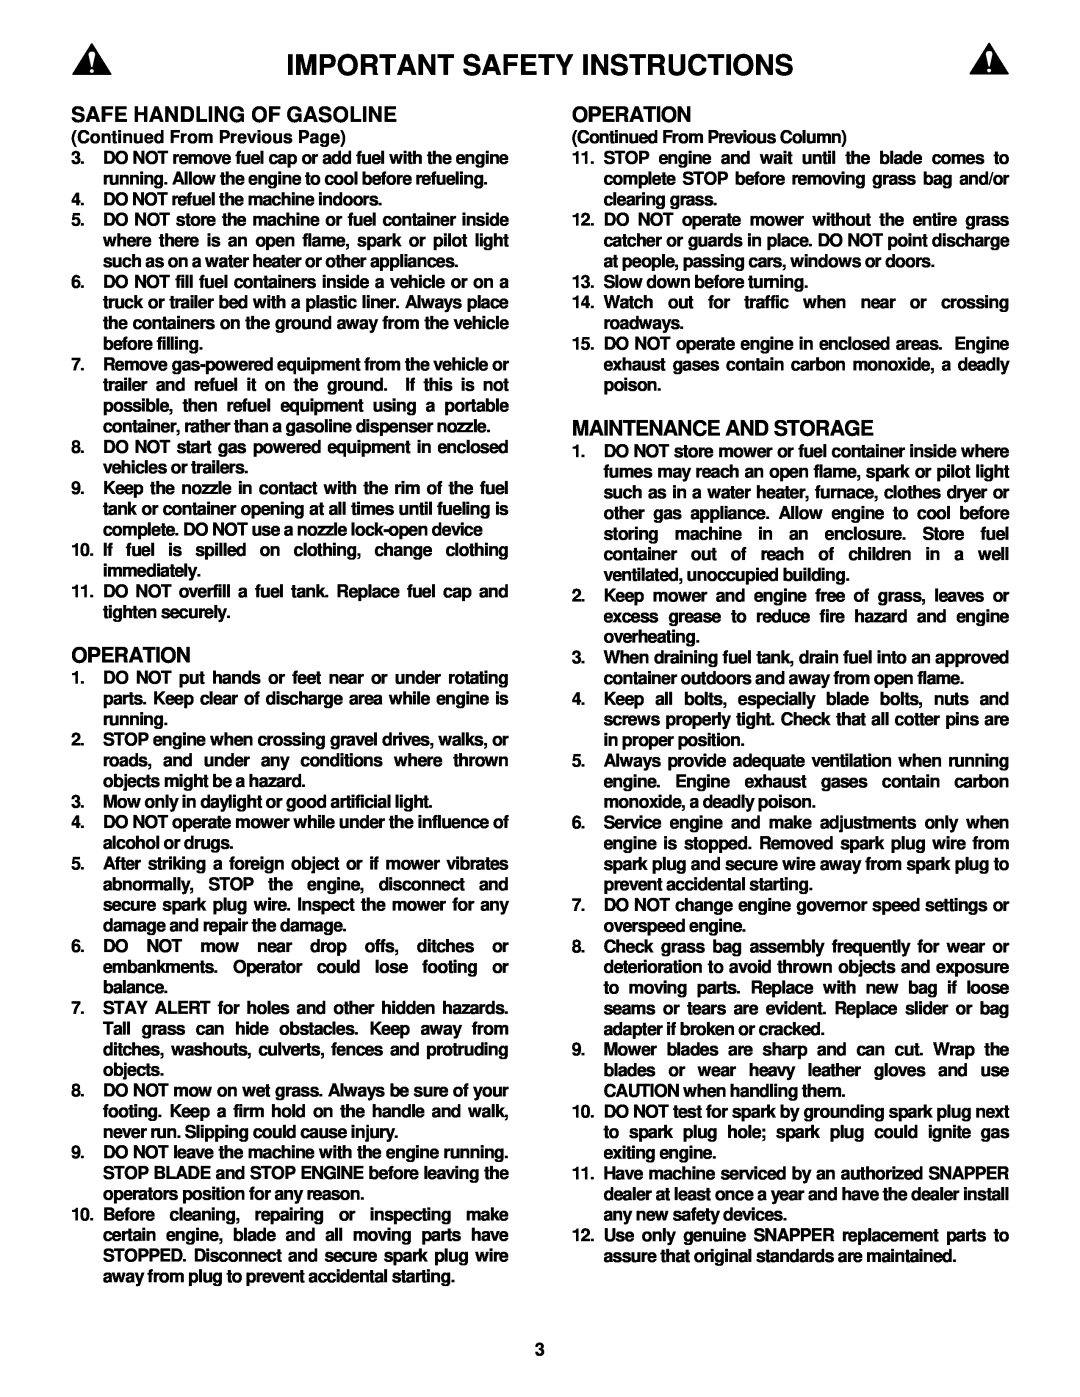 Snapper ECLP21 551HV important safety instructions Important Safety Instructions, Continued From Previous Page 